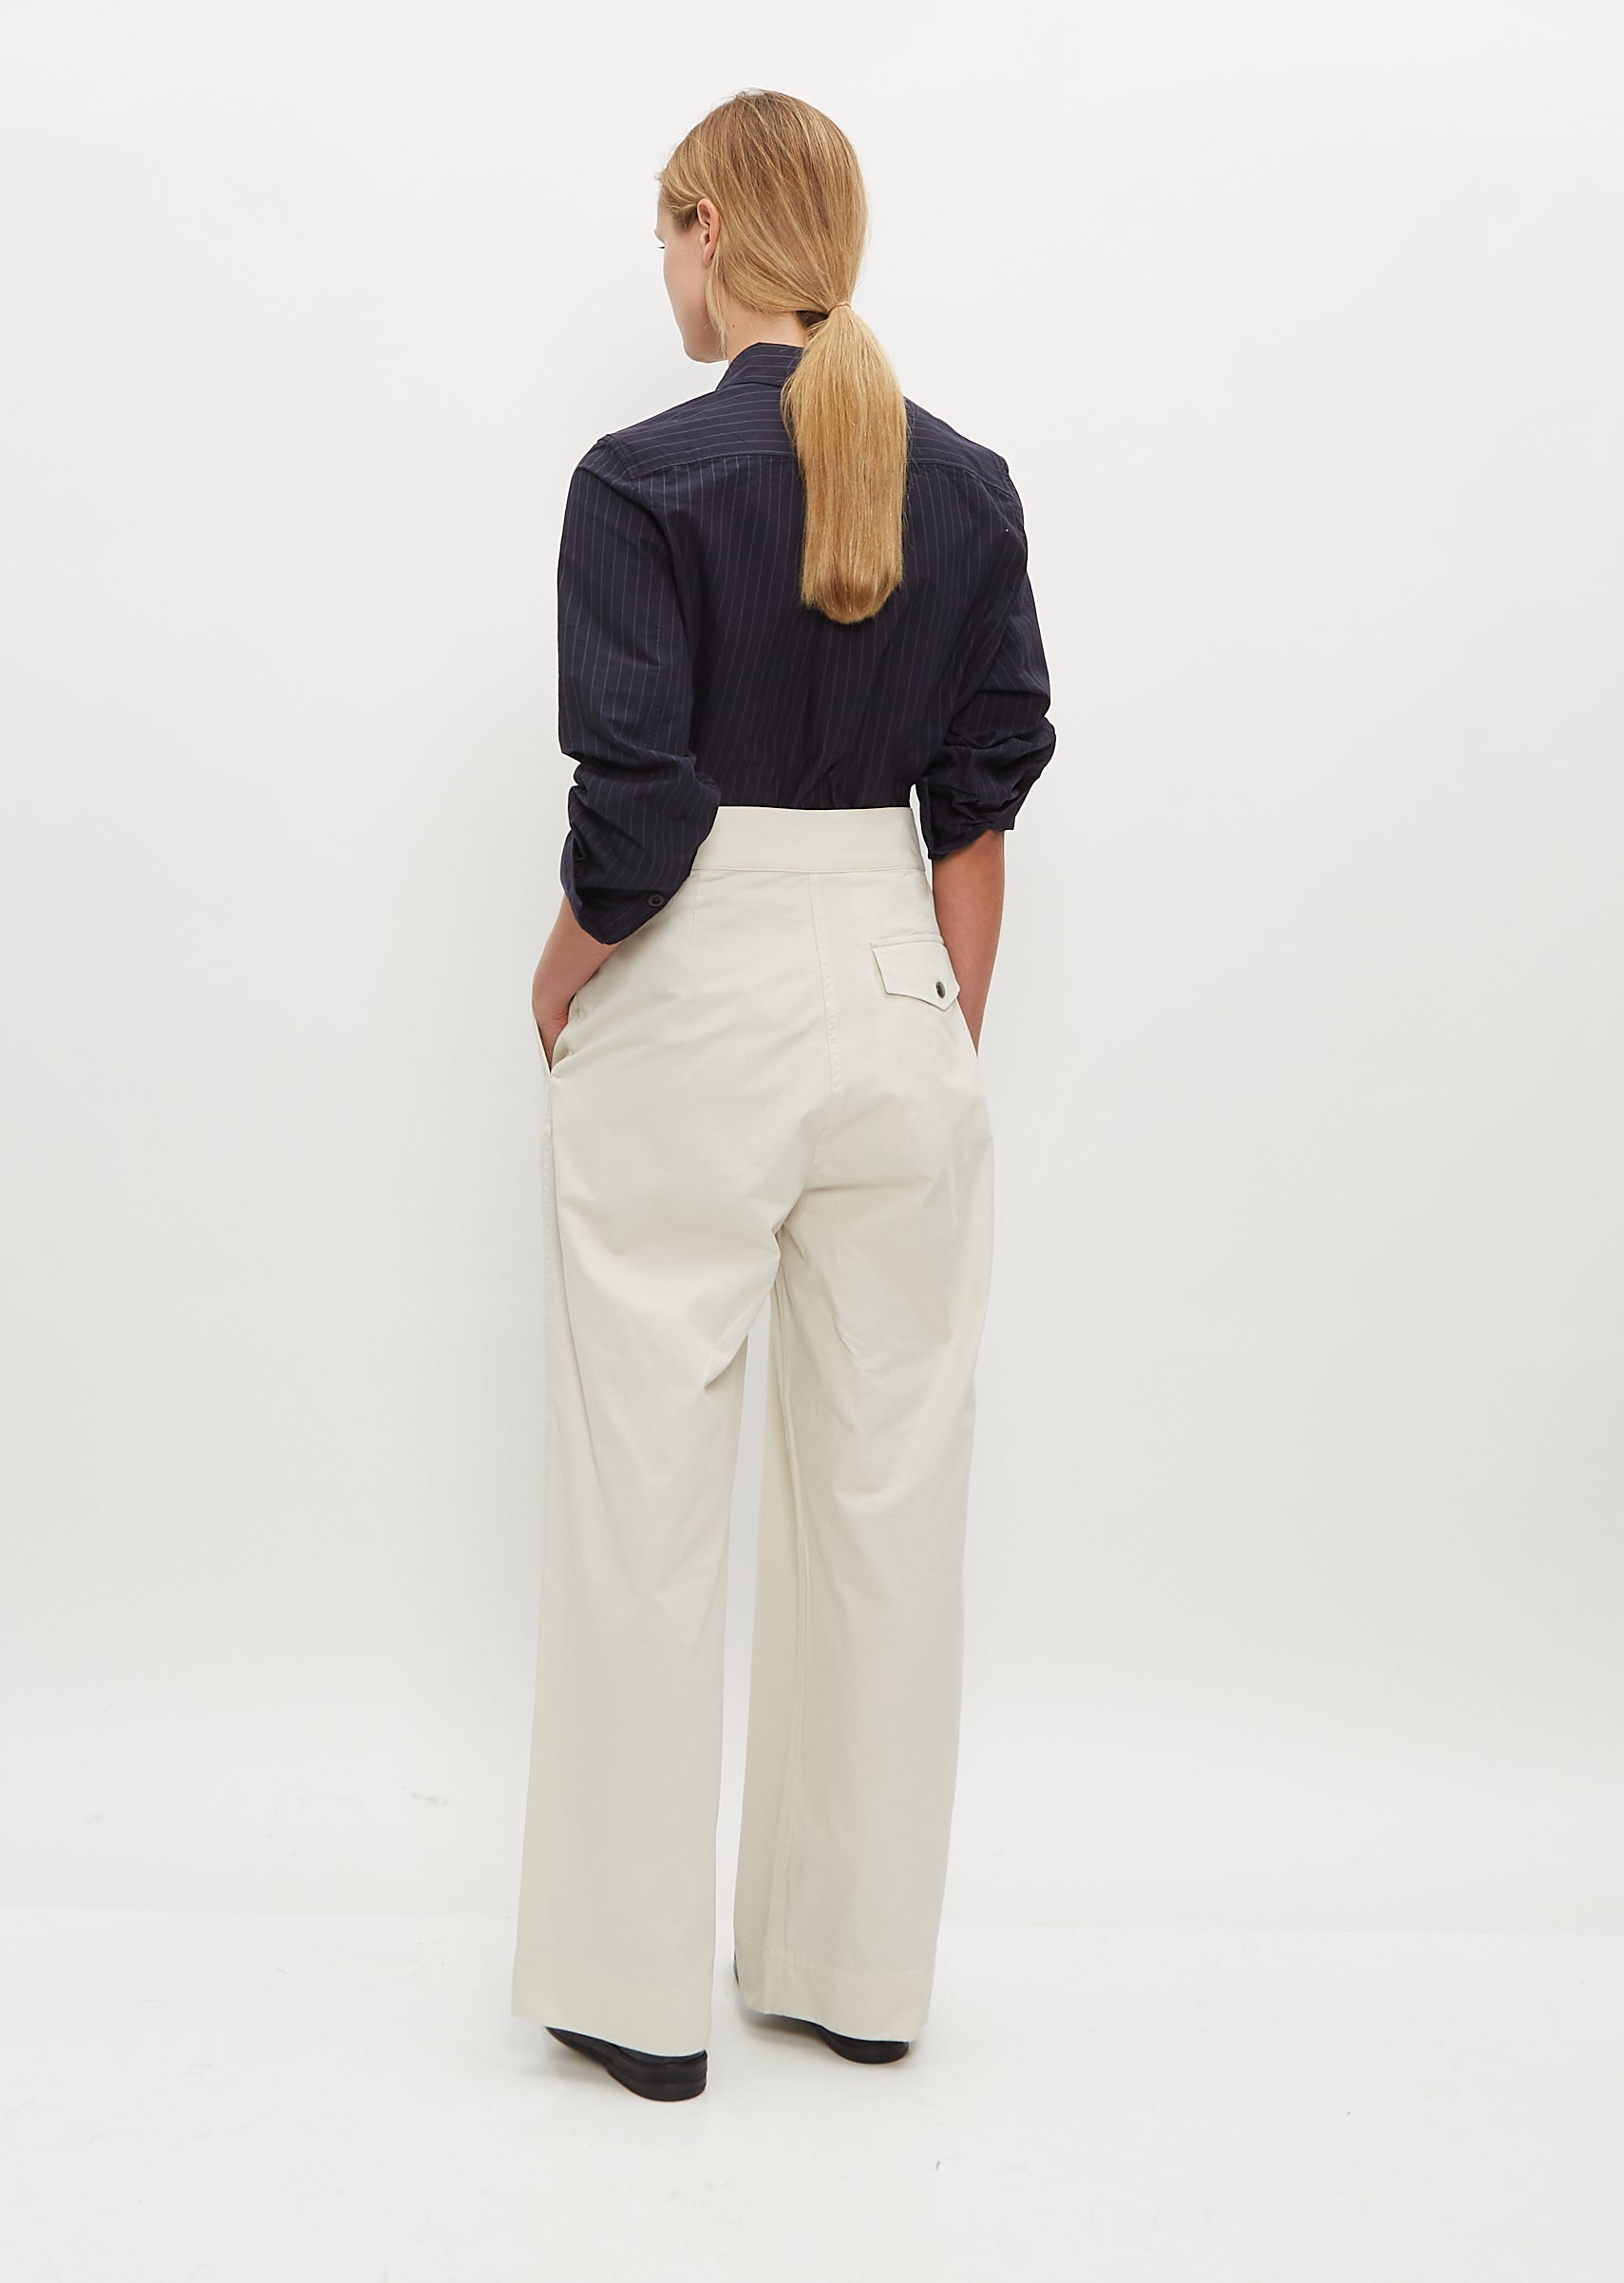 Women's Margaret M, Wide Leg and Wide Waistband Fashion Pant